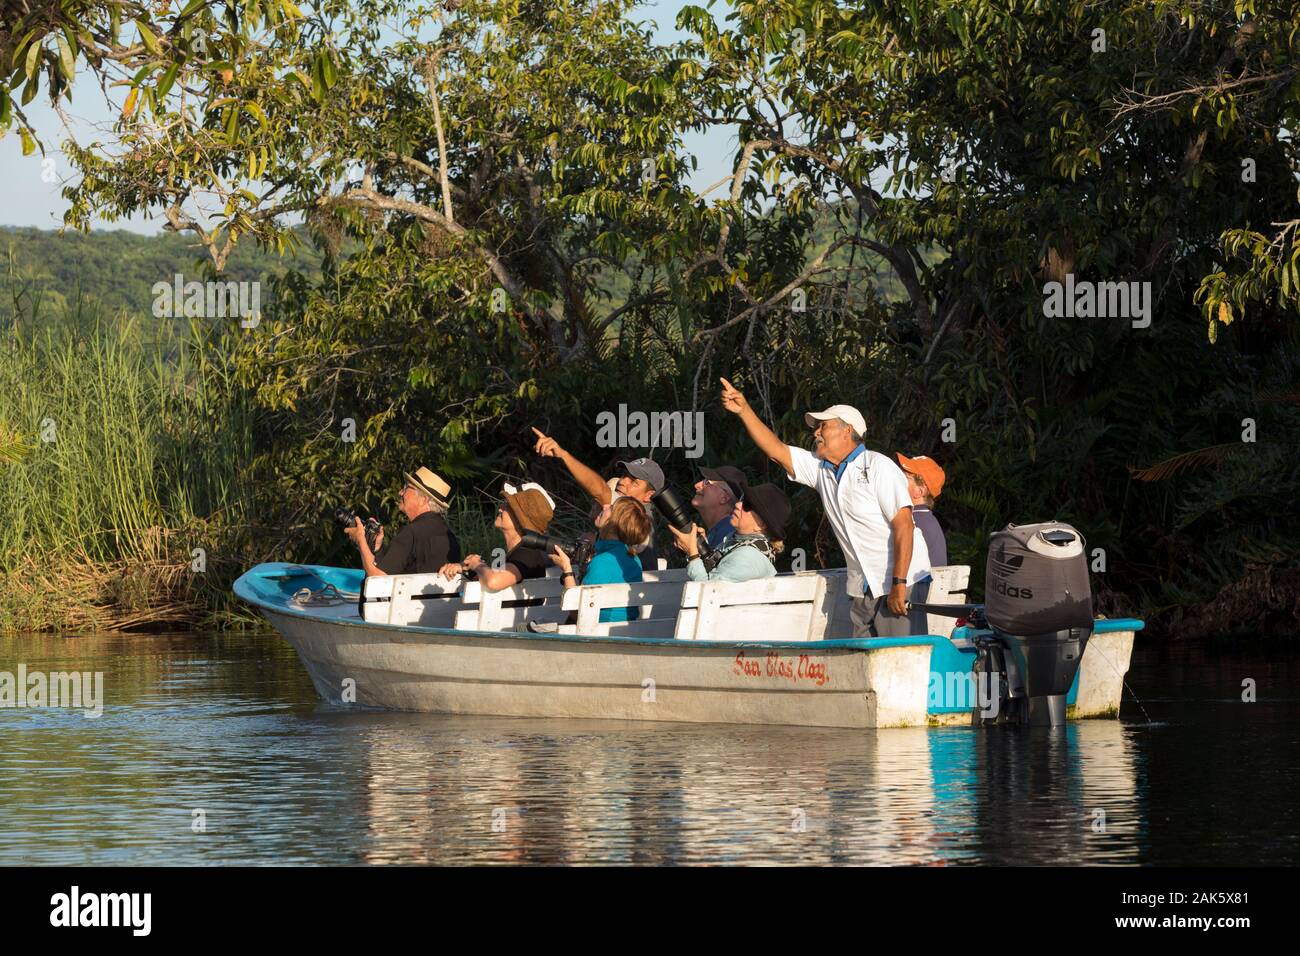 Mexico,Nayarit, San Blas, La Tovara National Park, birdwatching, group of tourists in a boat birdwatching in a mangrove Stock Photo